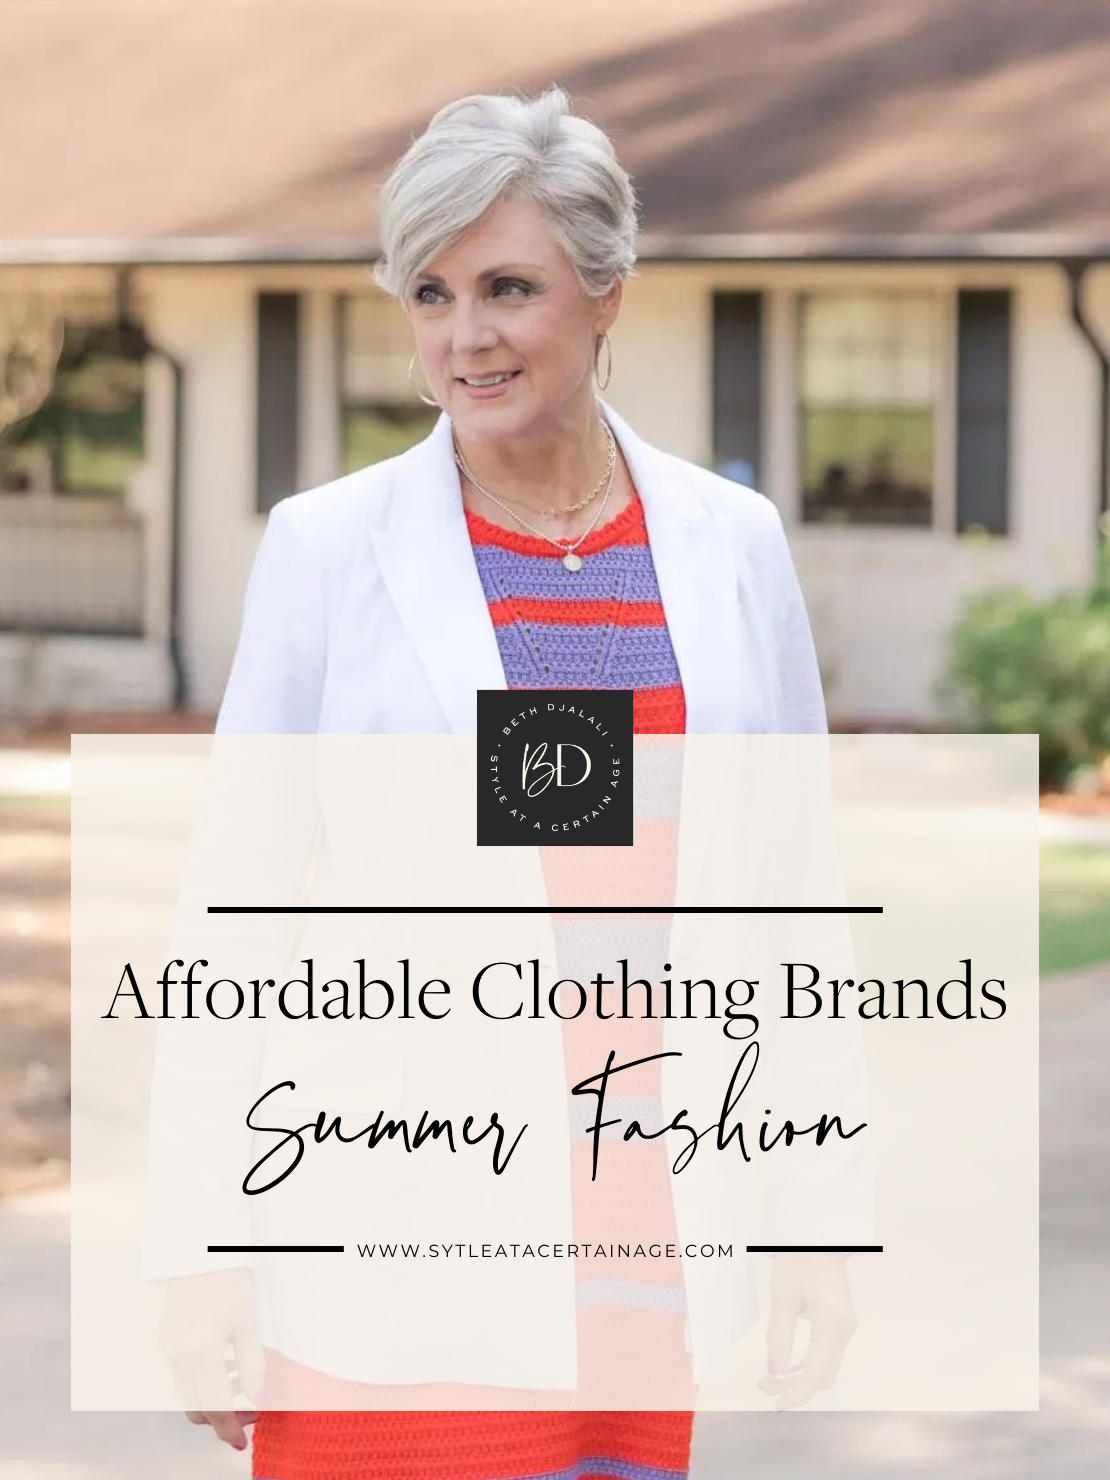 Affordable Clothing Brands